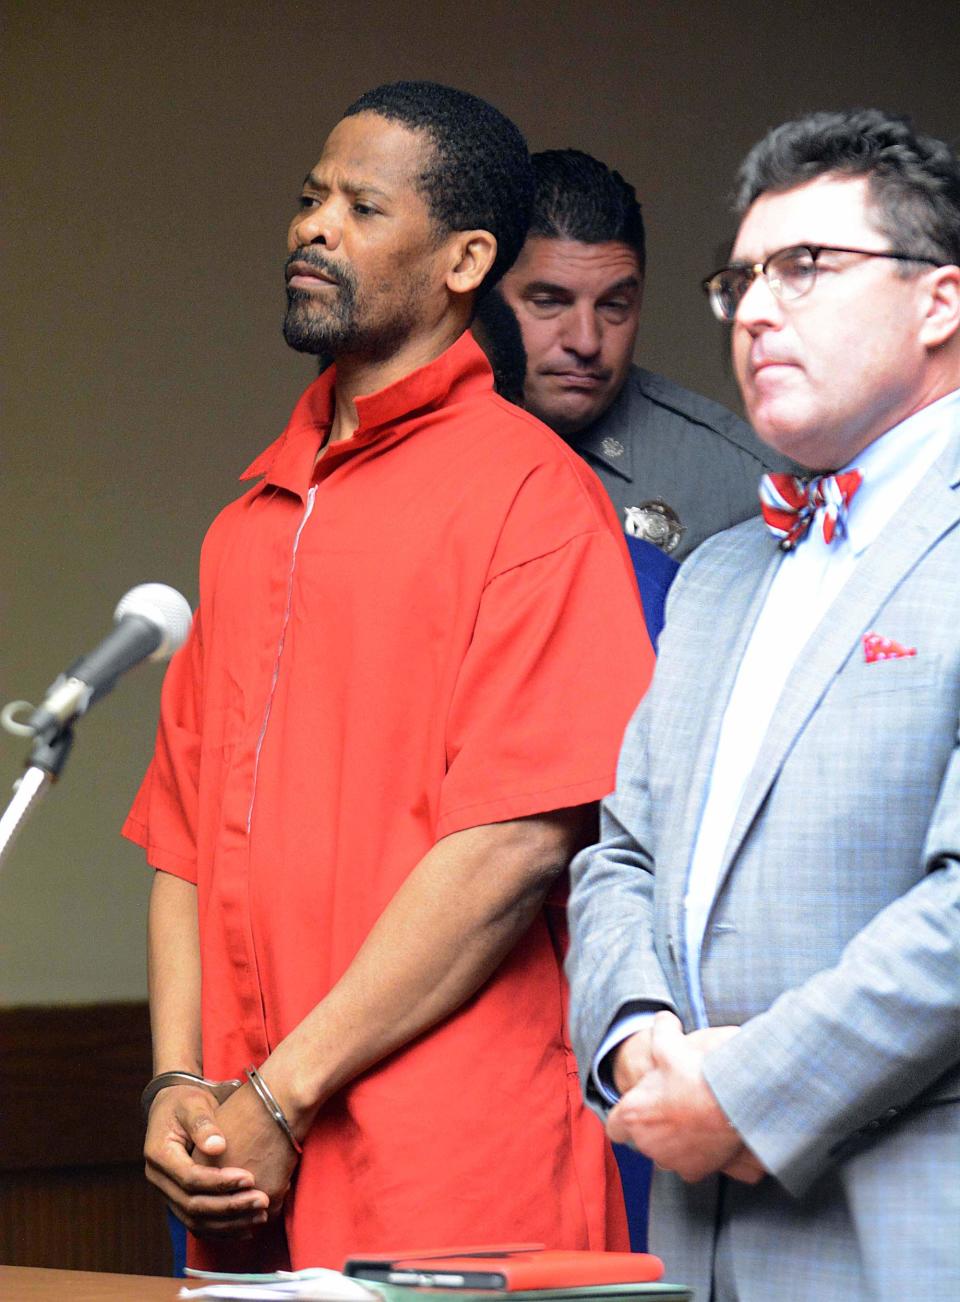 Jean Jacques with his attorney Sebastian DeSantis in 2019 during his arraignment on his re-trial for the murder of Casey Chadwick at New London Superior Court.